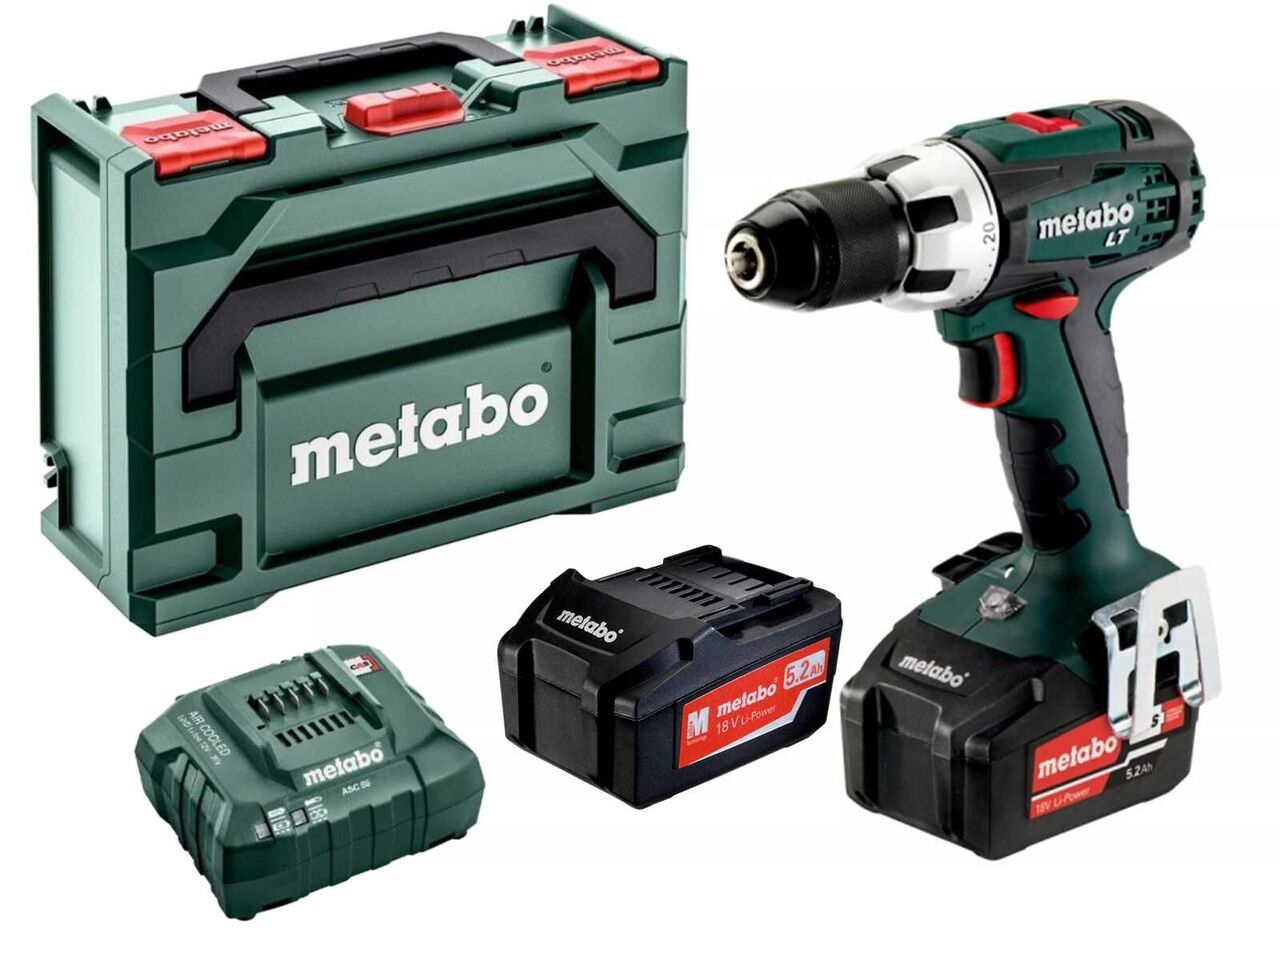 Metabo BS 18 LT other tool